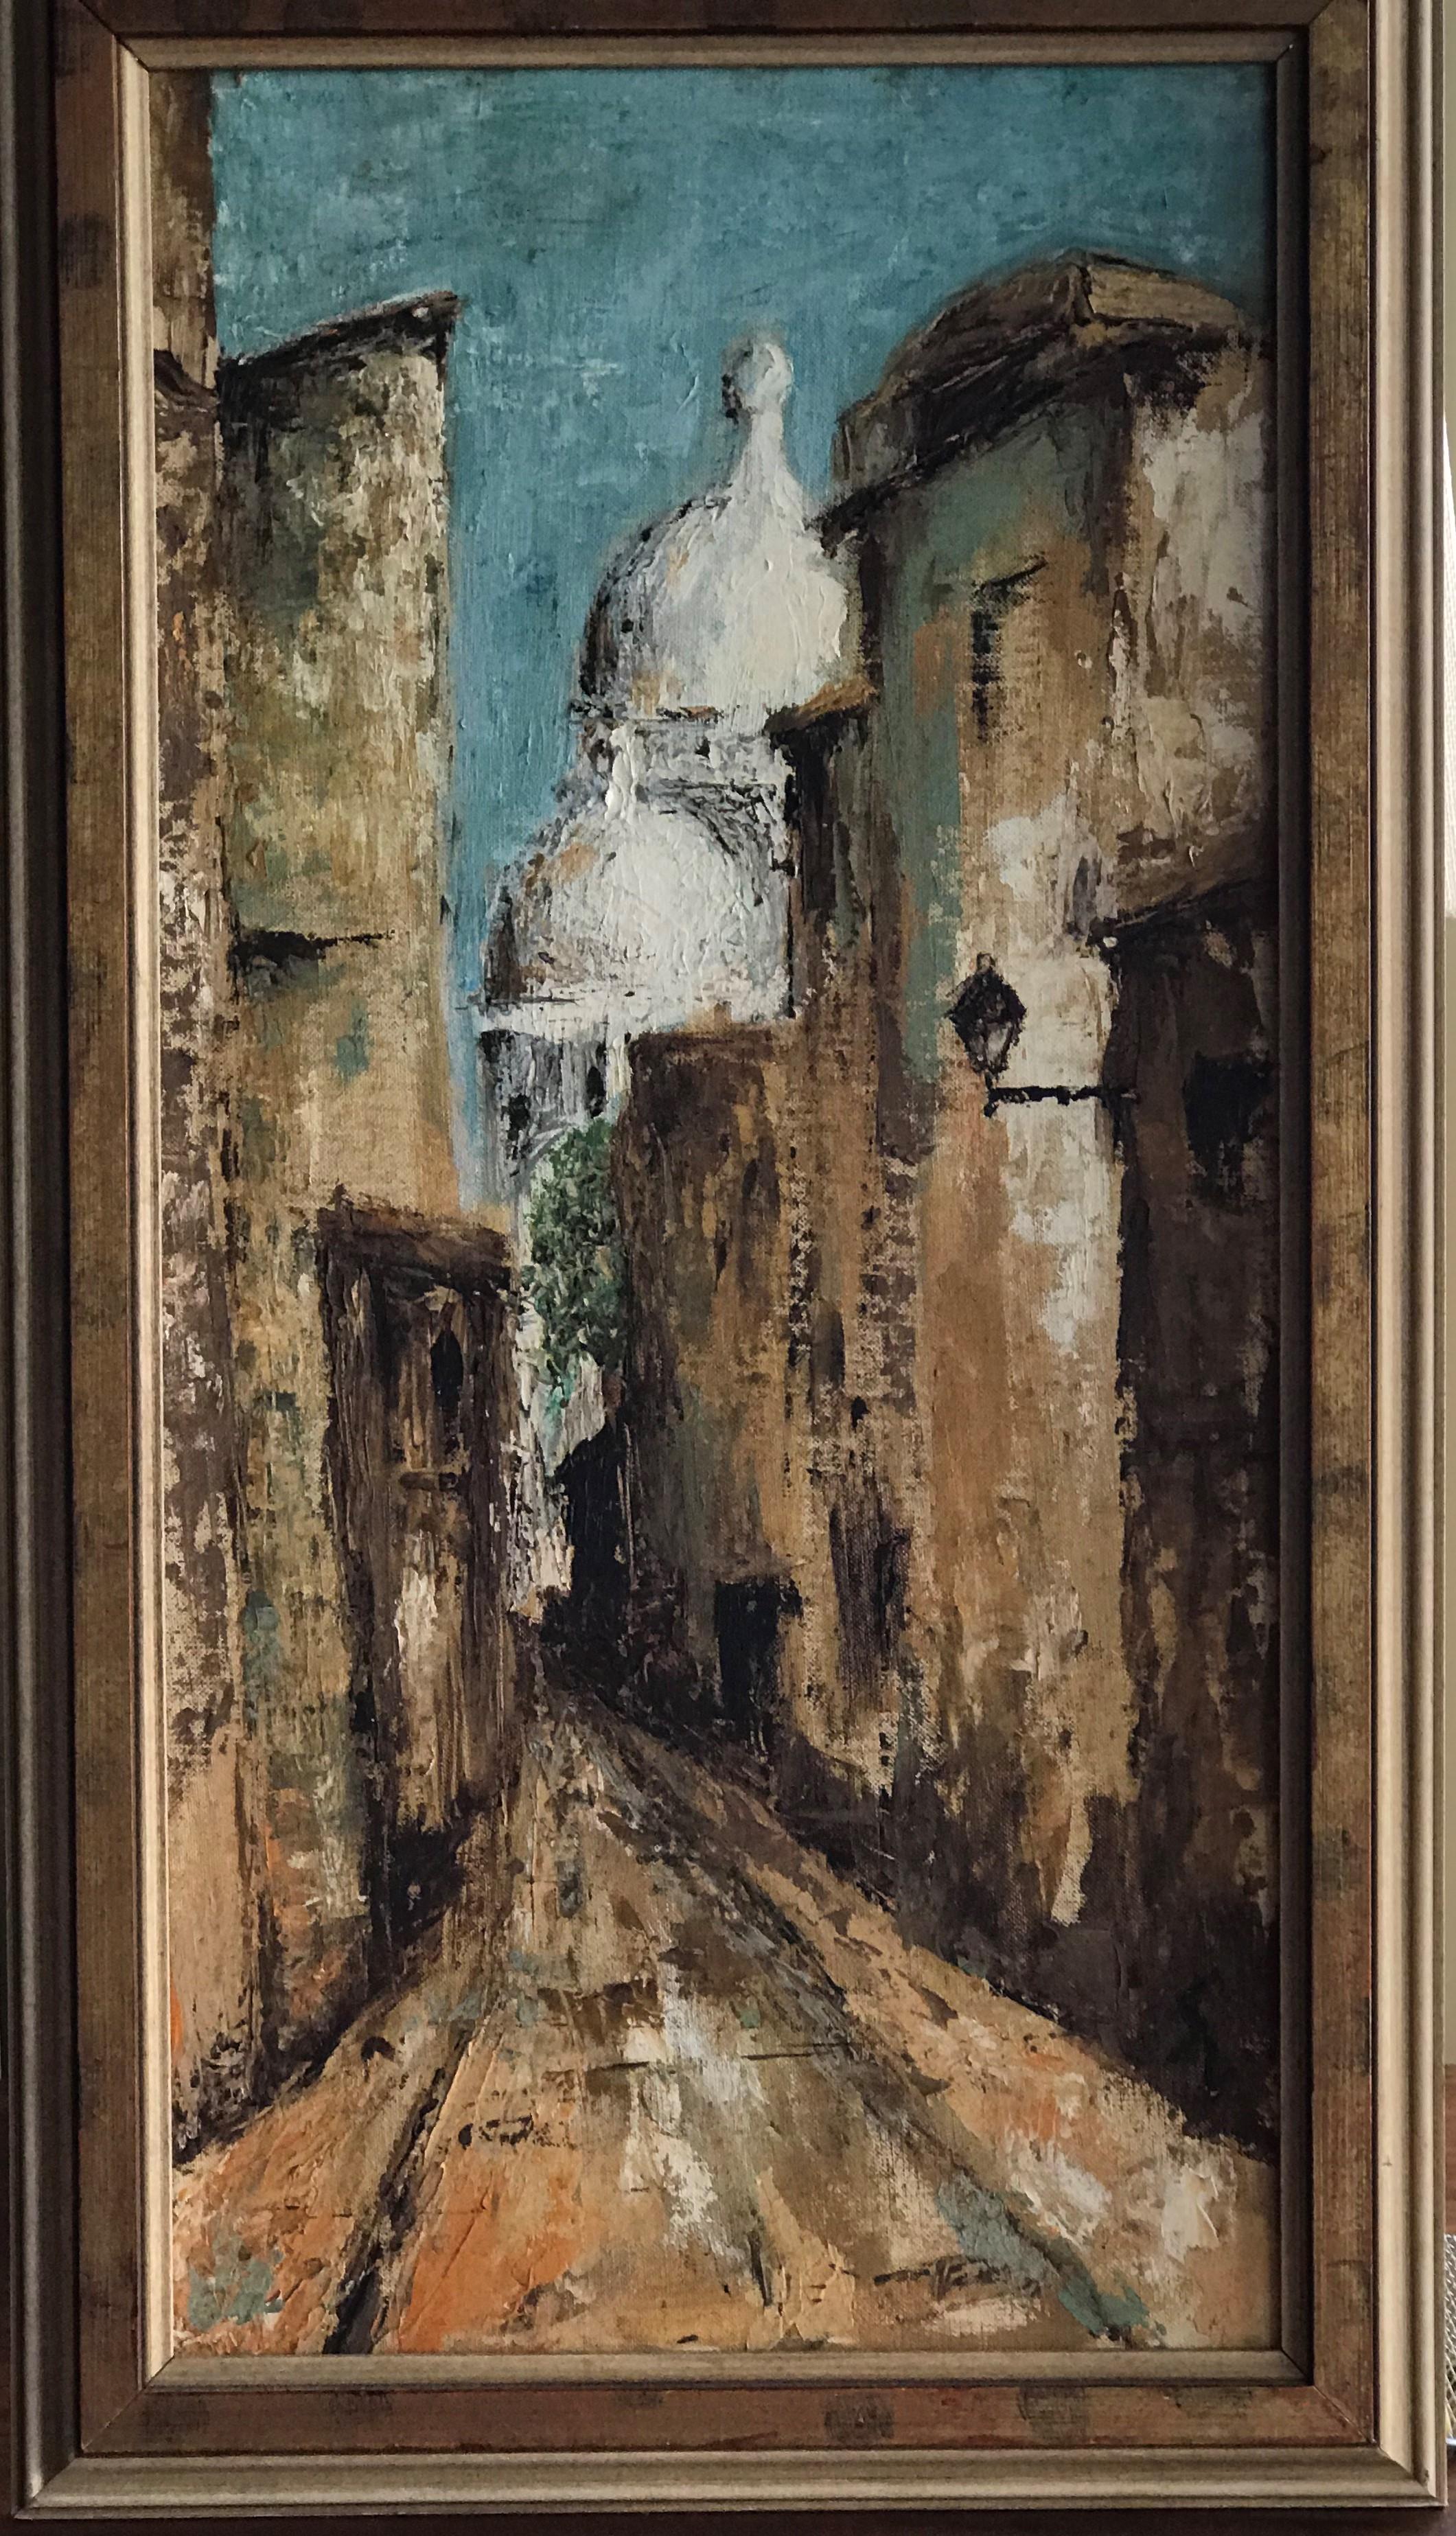 Oil painting on masonite board depicting a view of Sacré-Cœur Basilica in the Montmatre district of Paris in the 1950s. Bohemian neighborhood known for its artists, famous and infamous night clubs and cafes.
This Impressionist painting in its